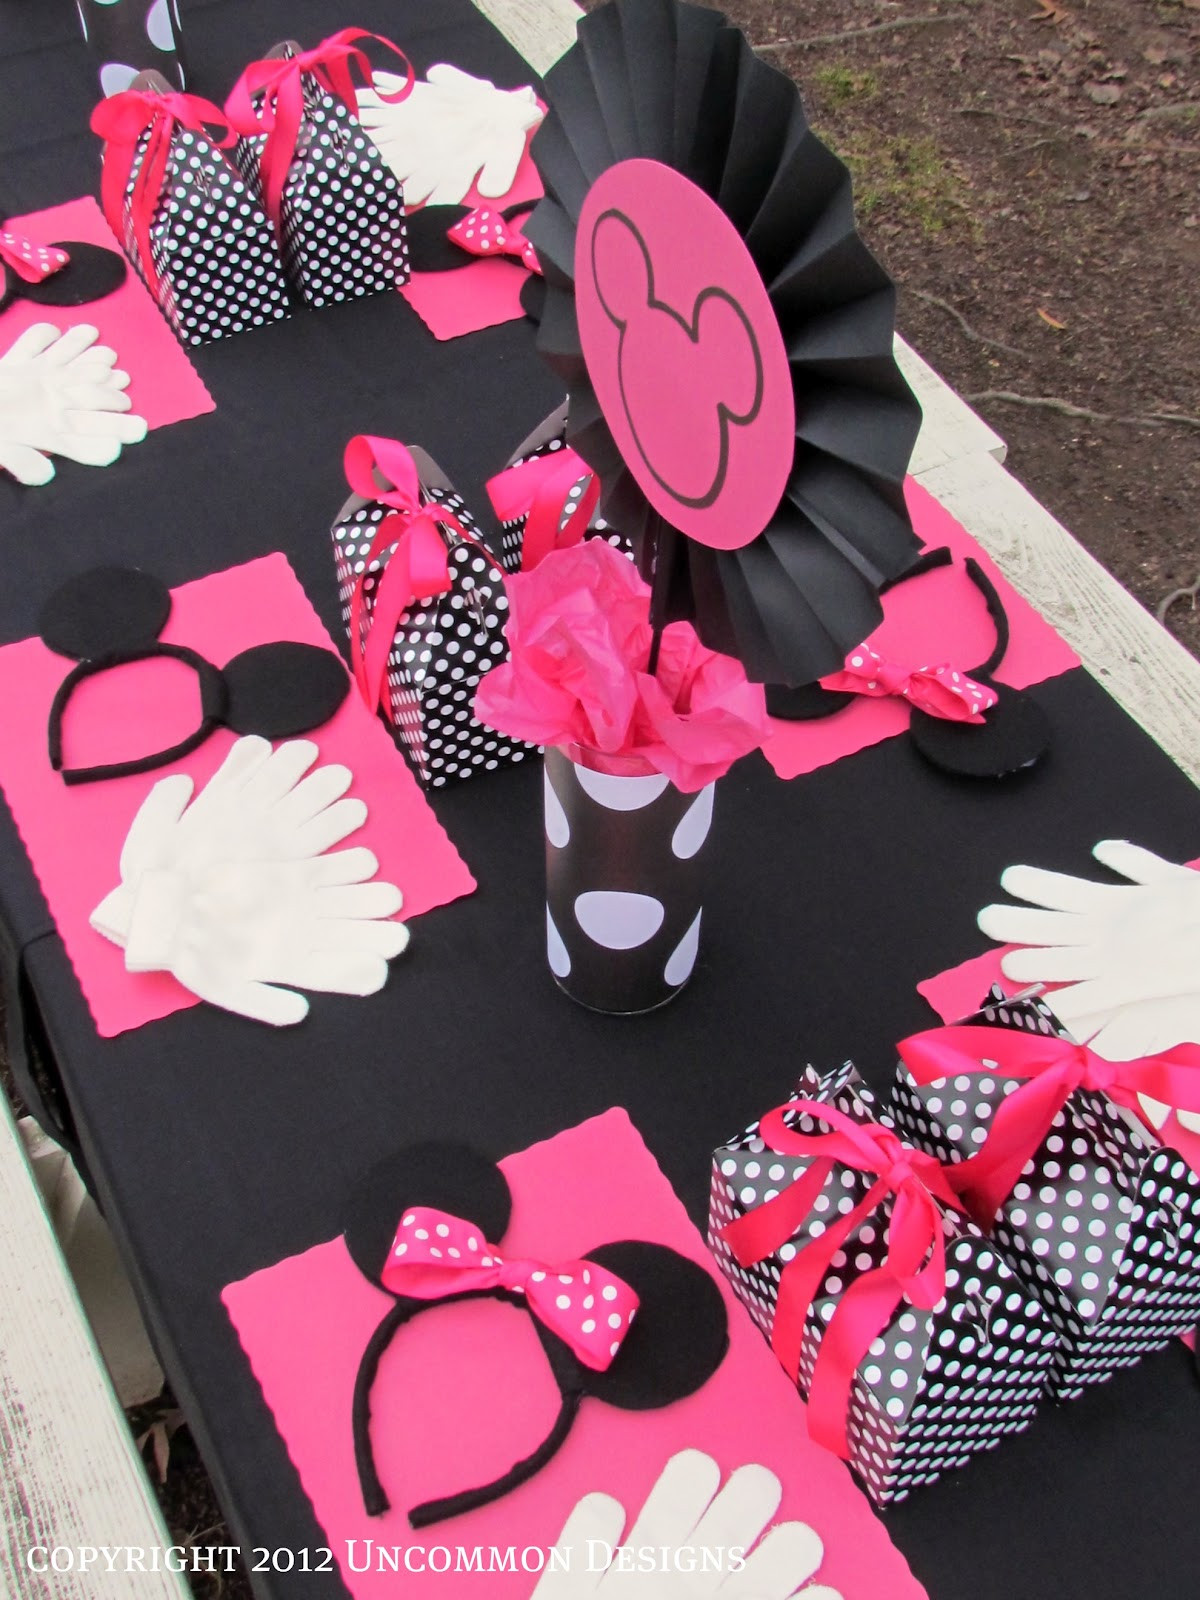 Minnie Mouse Birthday Decorations
 A Minnie Mouse Birthday Party Un mon Designs